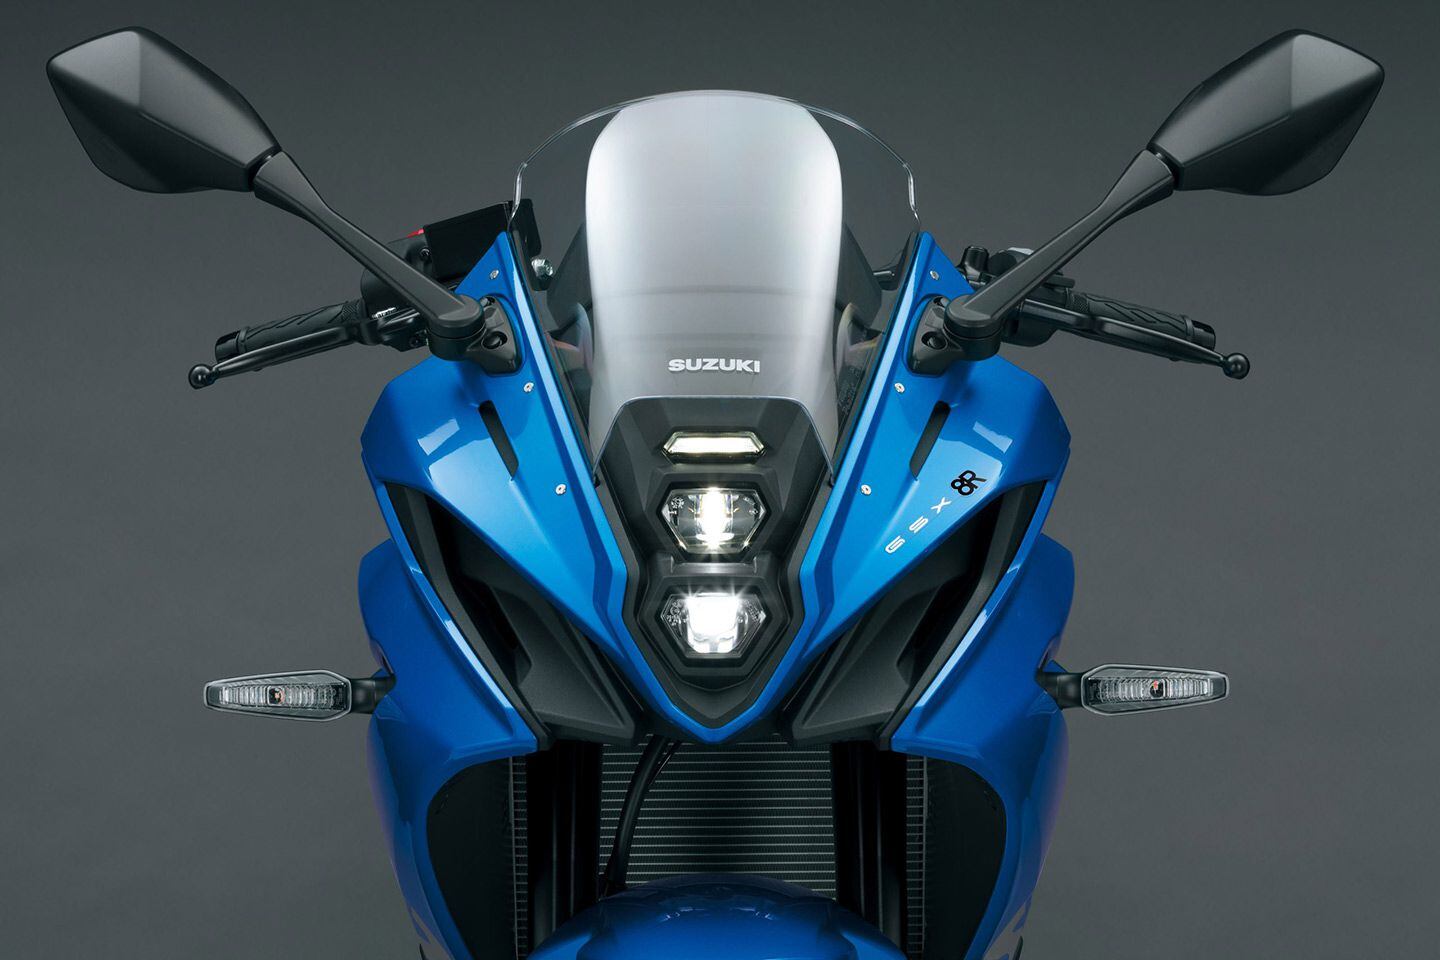 The stacked headlights conform to the rest of Suzuki’s middleweight twin family, but are mounted to the fairing instead of to the bars.